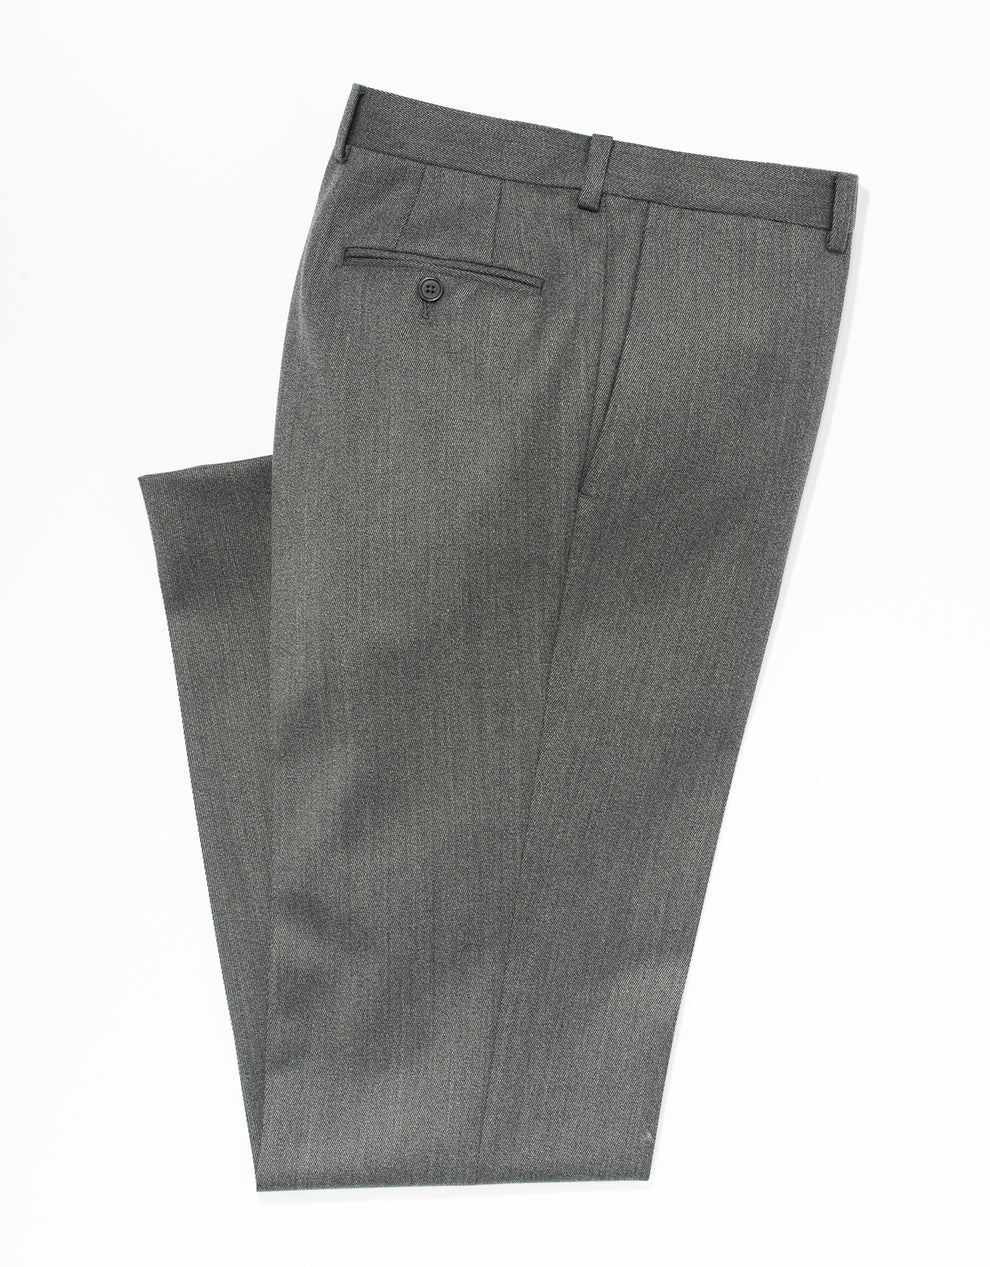 Grey Whipcord Trousers | J. PRESS